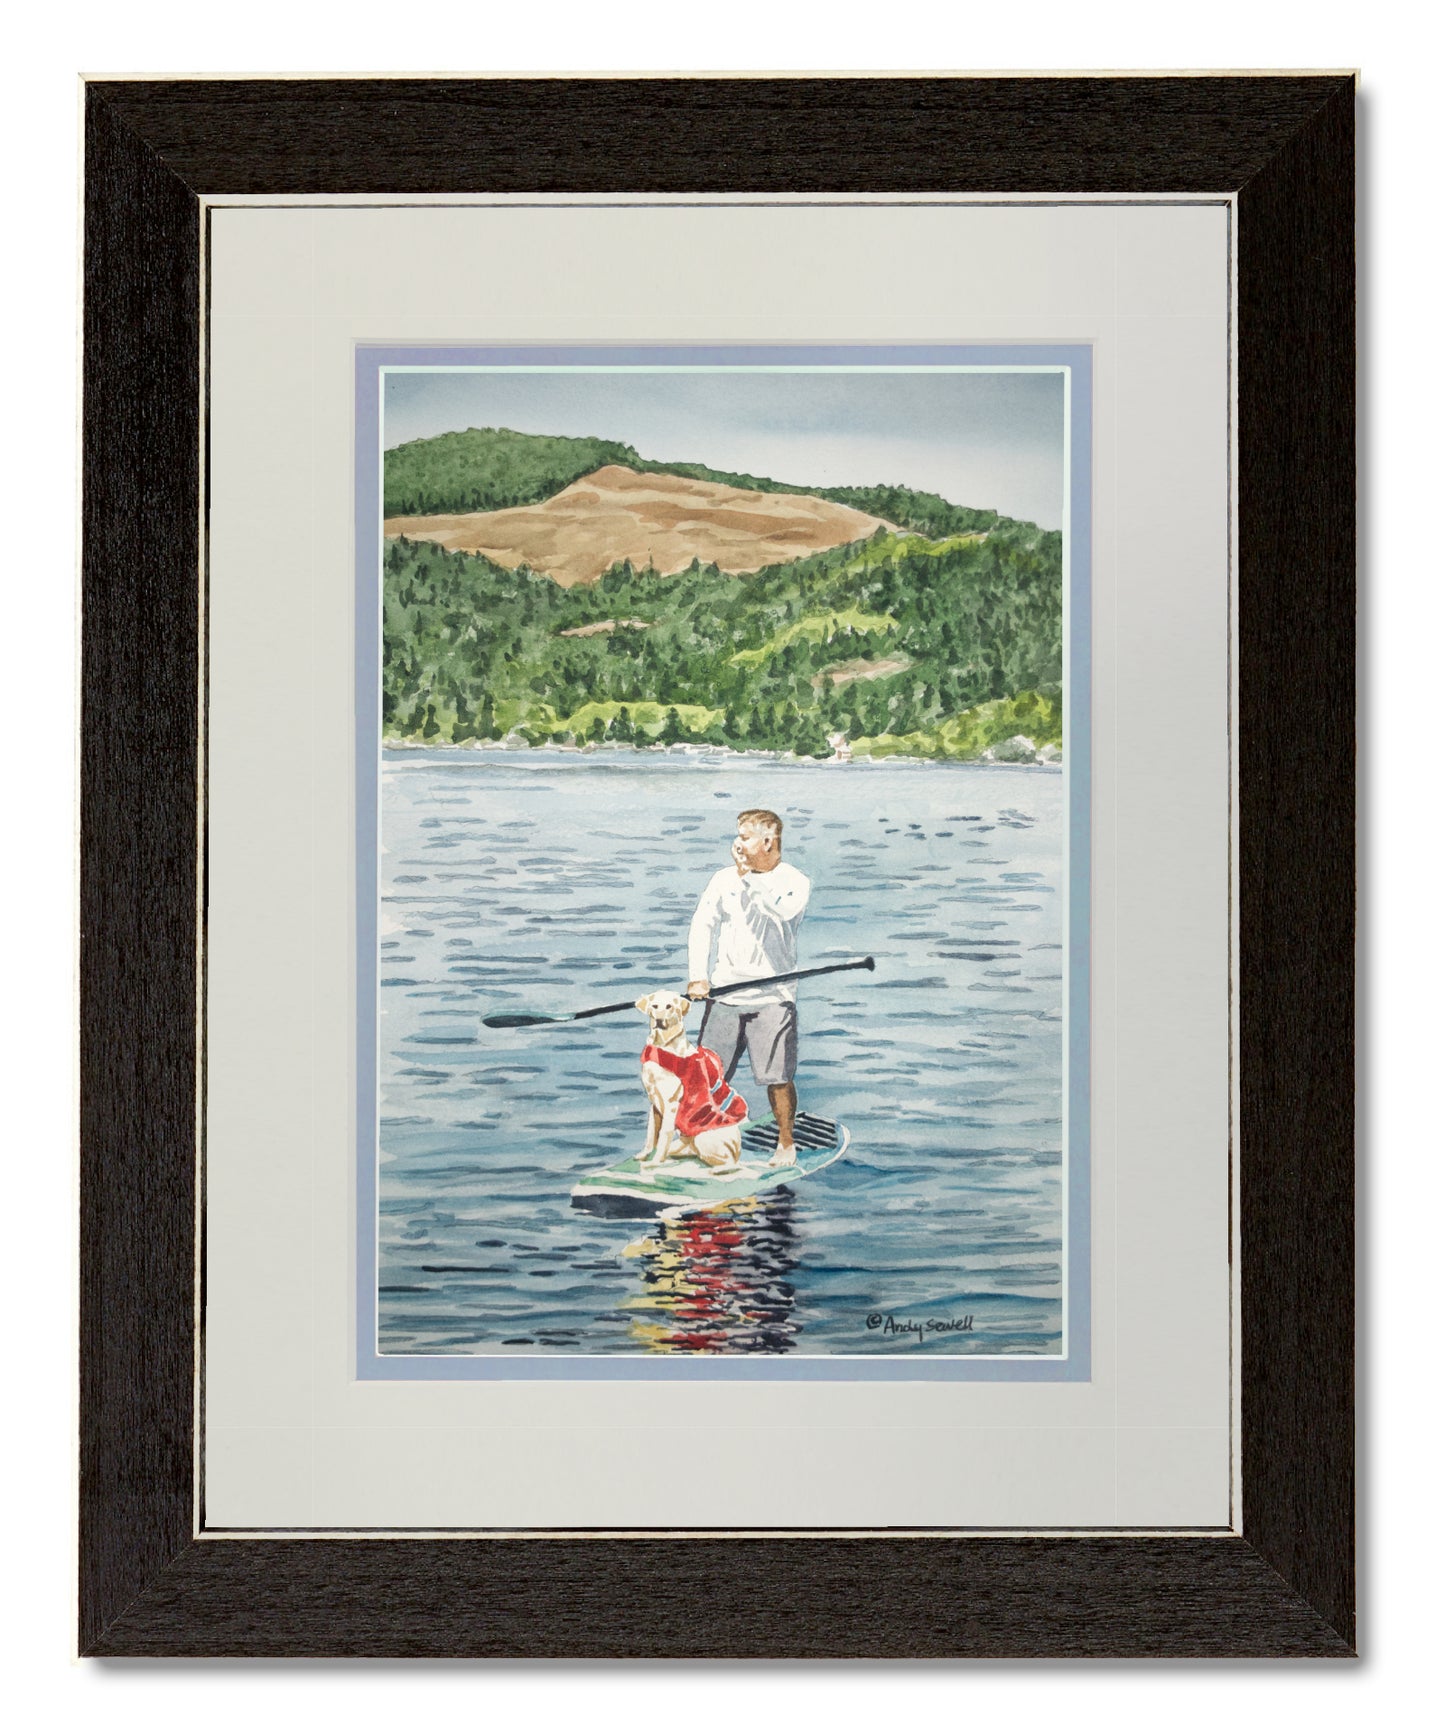 "Mark and Bailey" - A Giclee reprod. watercolor painting commission of paddle boarder with Dog on a Lake - Andy Sewell